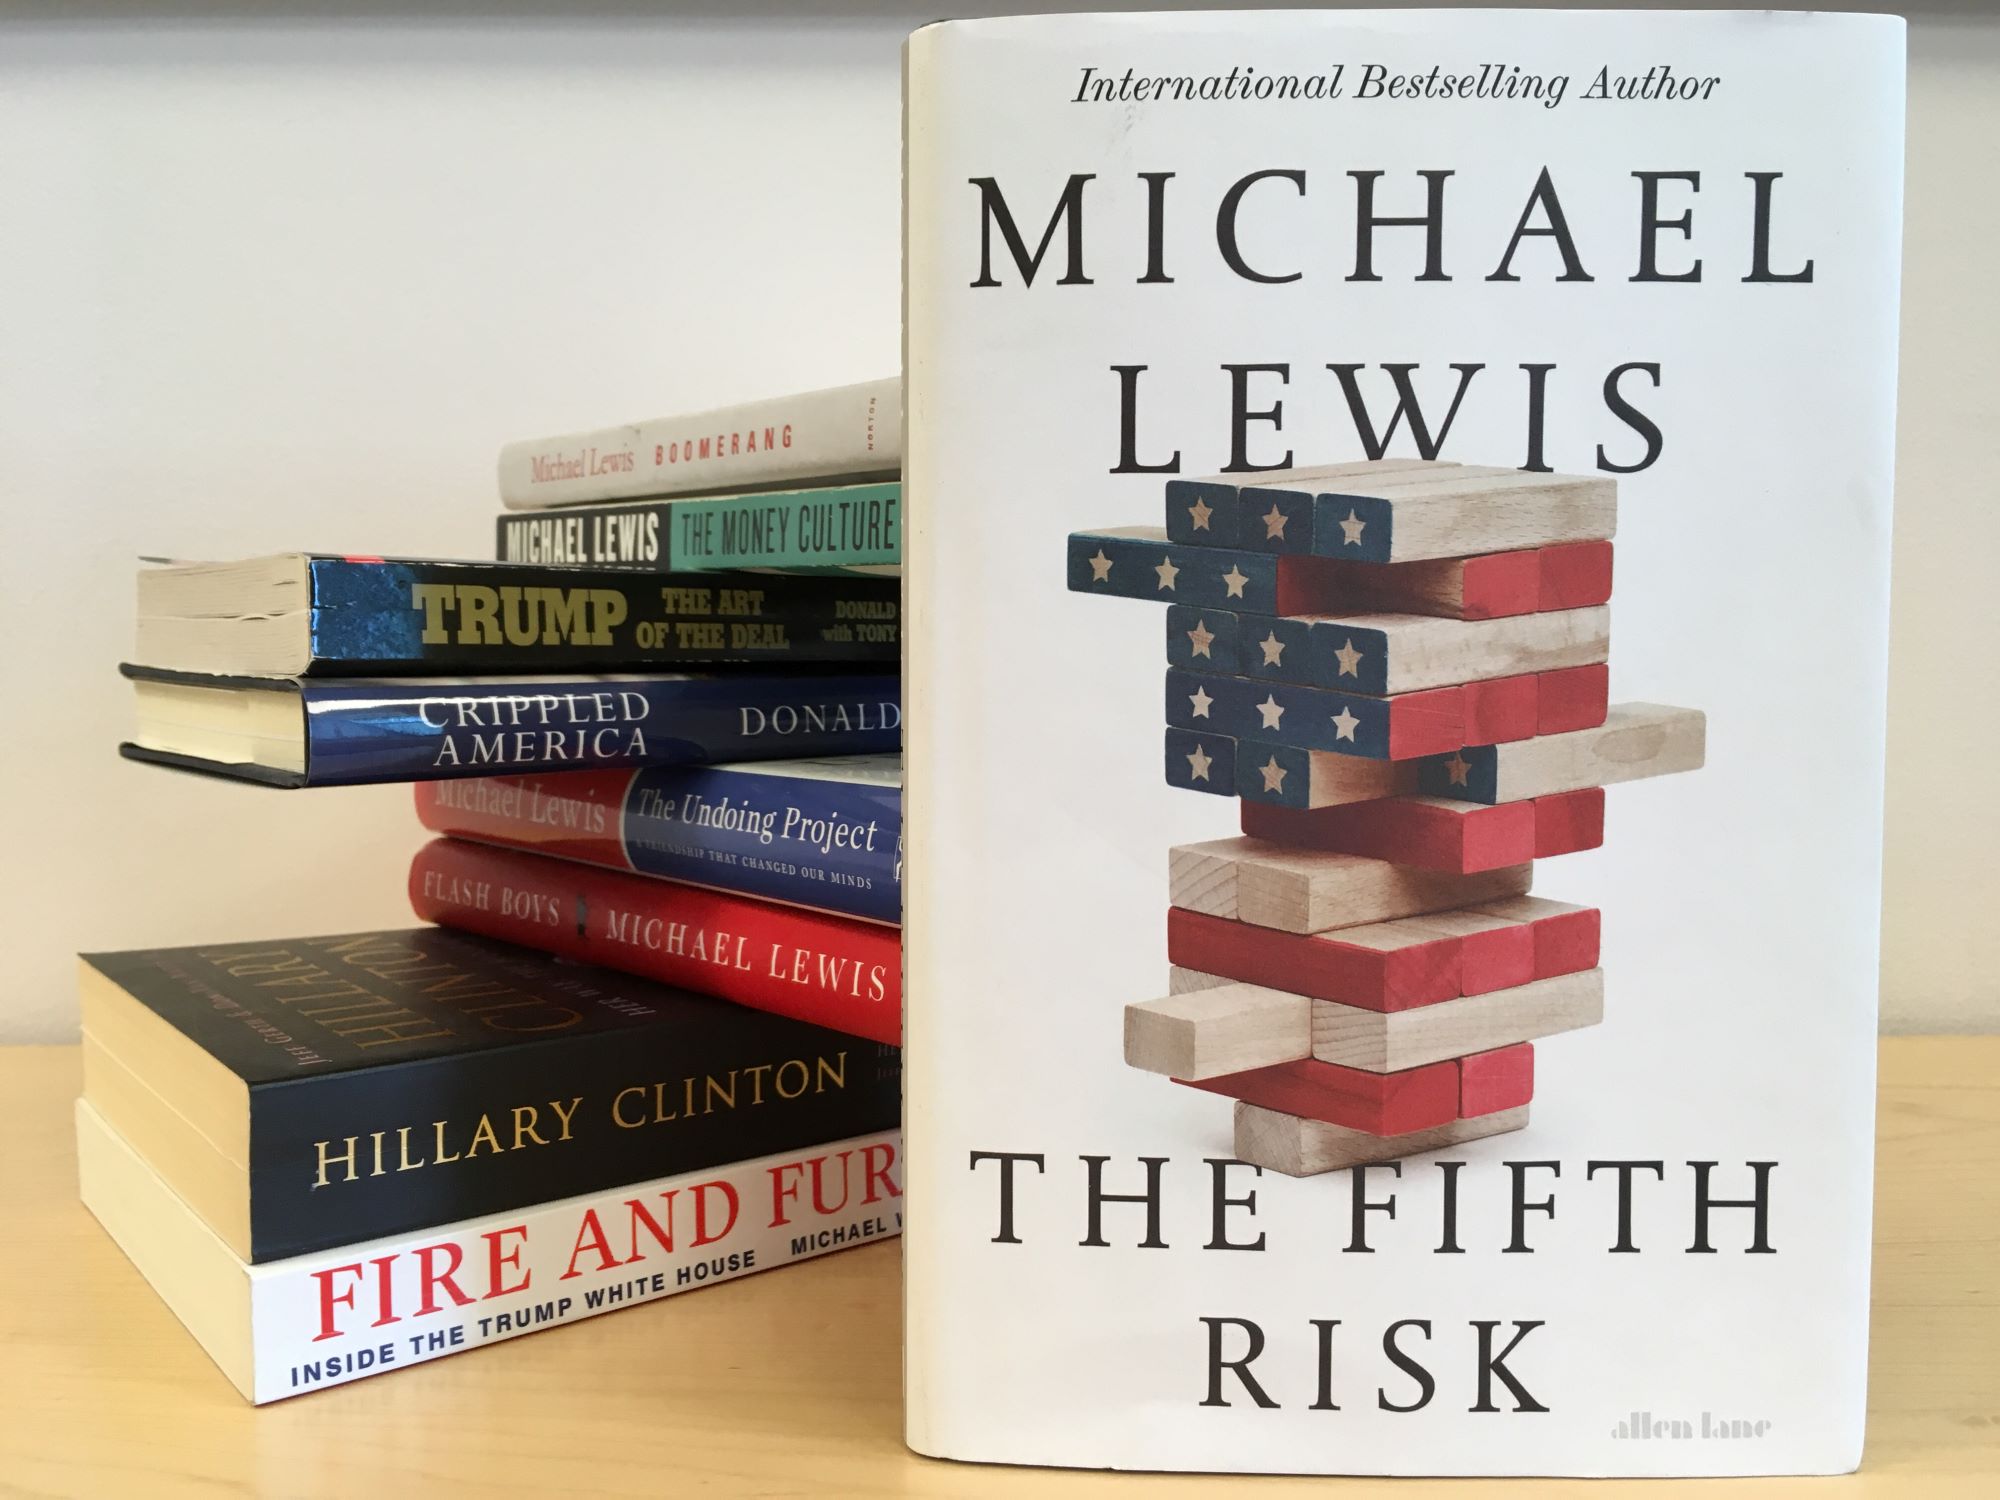 18-intriguing-facts-about-the-fifth-risk-michael-lewis